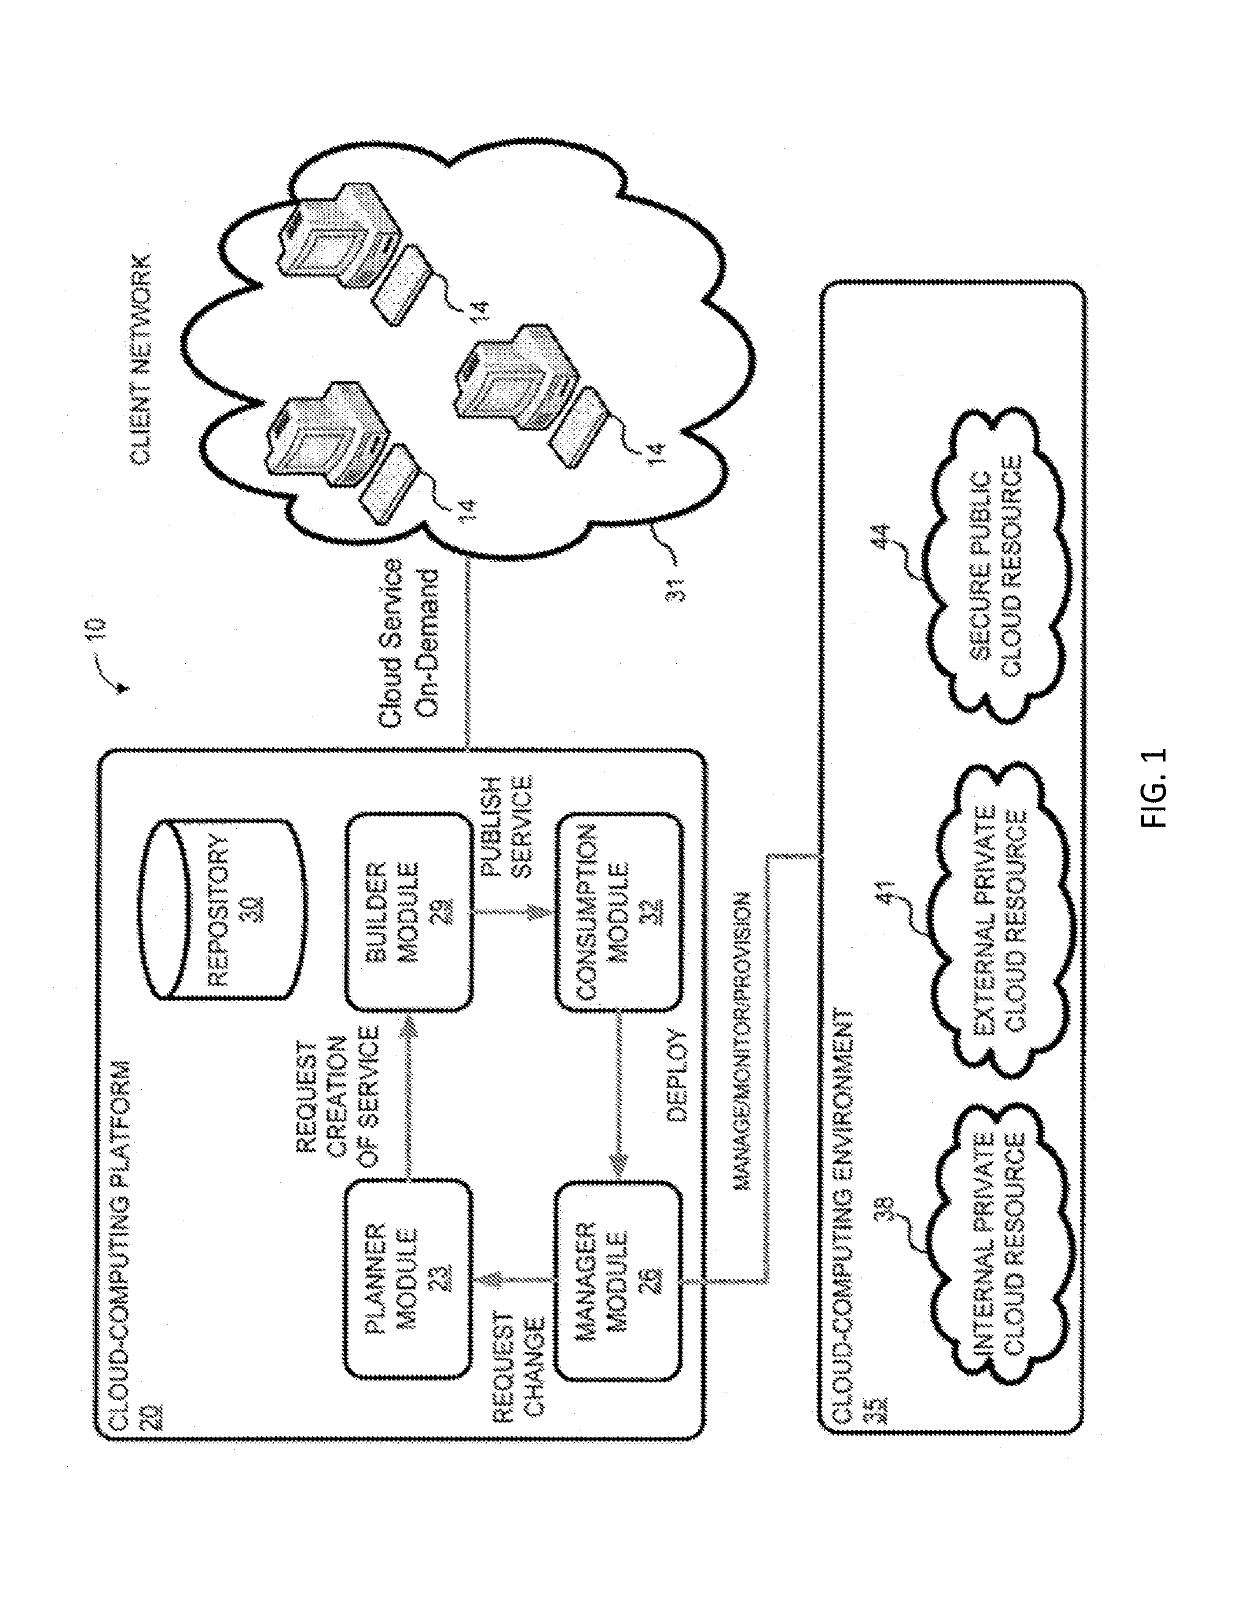 System and method for a cloud computing abstraction with multi-tier deployment policy